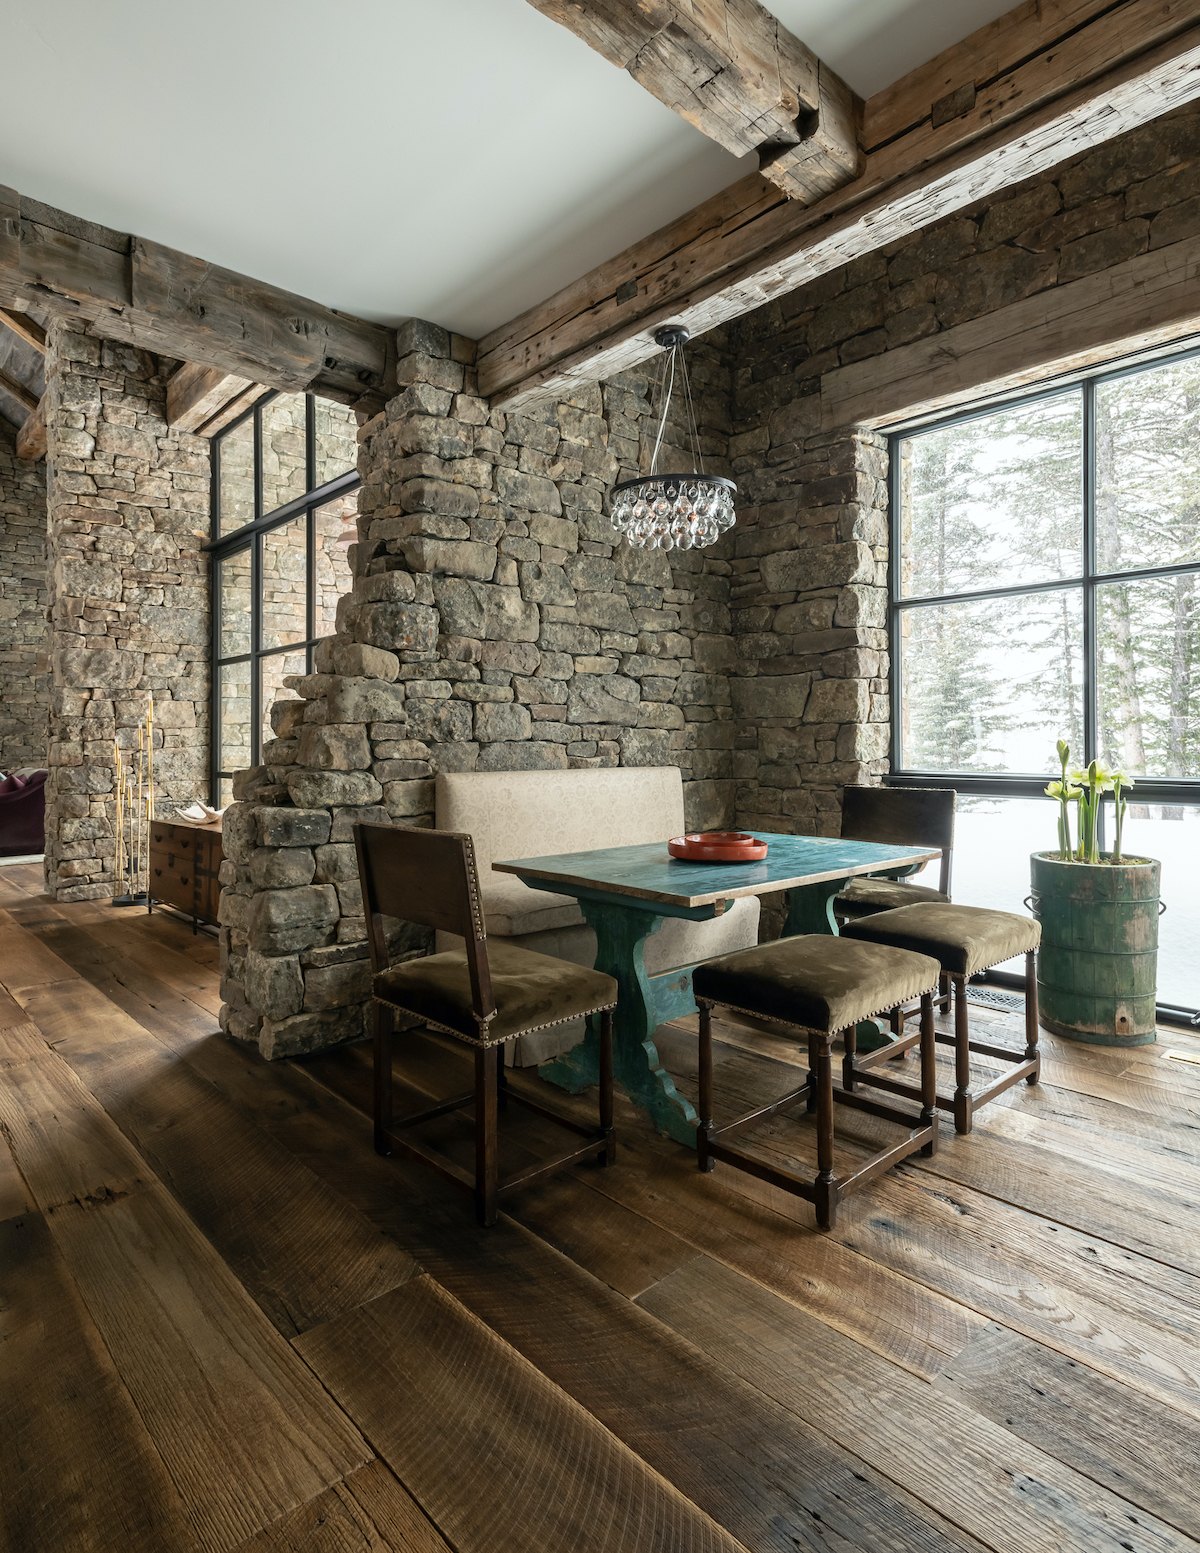 Big Sky Journal’s winter issue features this JLF Architects-designed Jackson Hole house, praising the history-inspired stone “remnant” wall that divides and warms the space (PC: Audrey Hall).